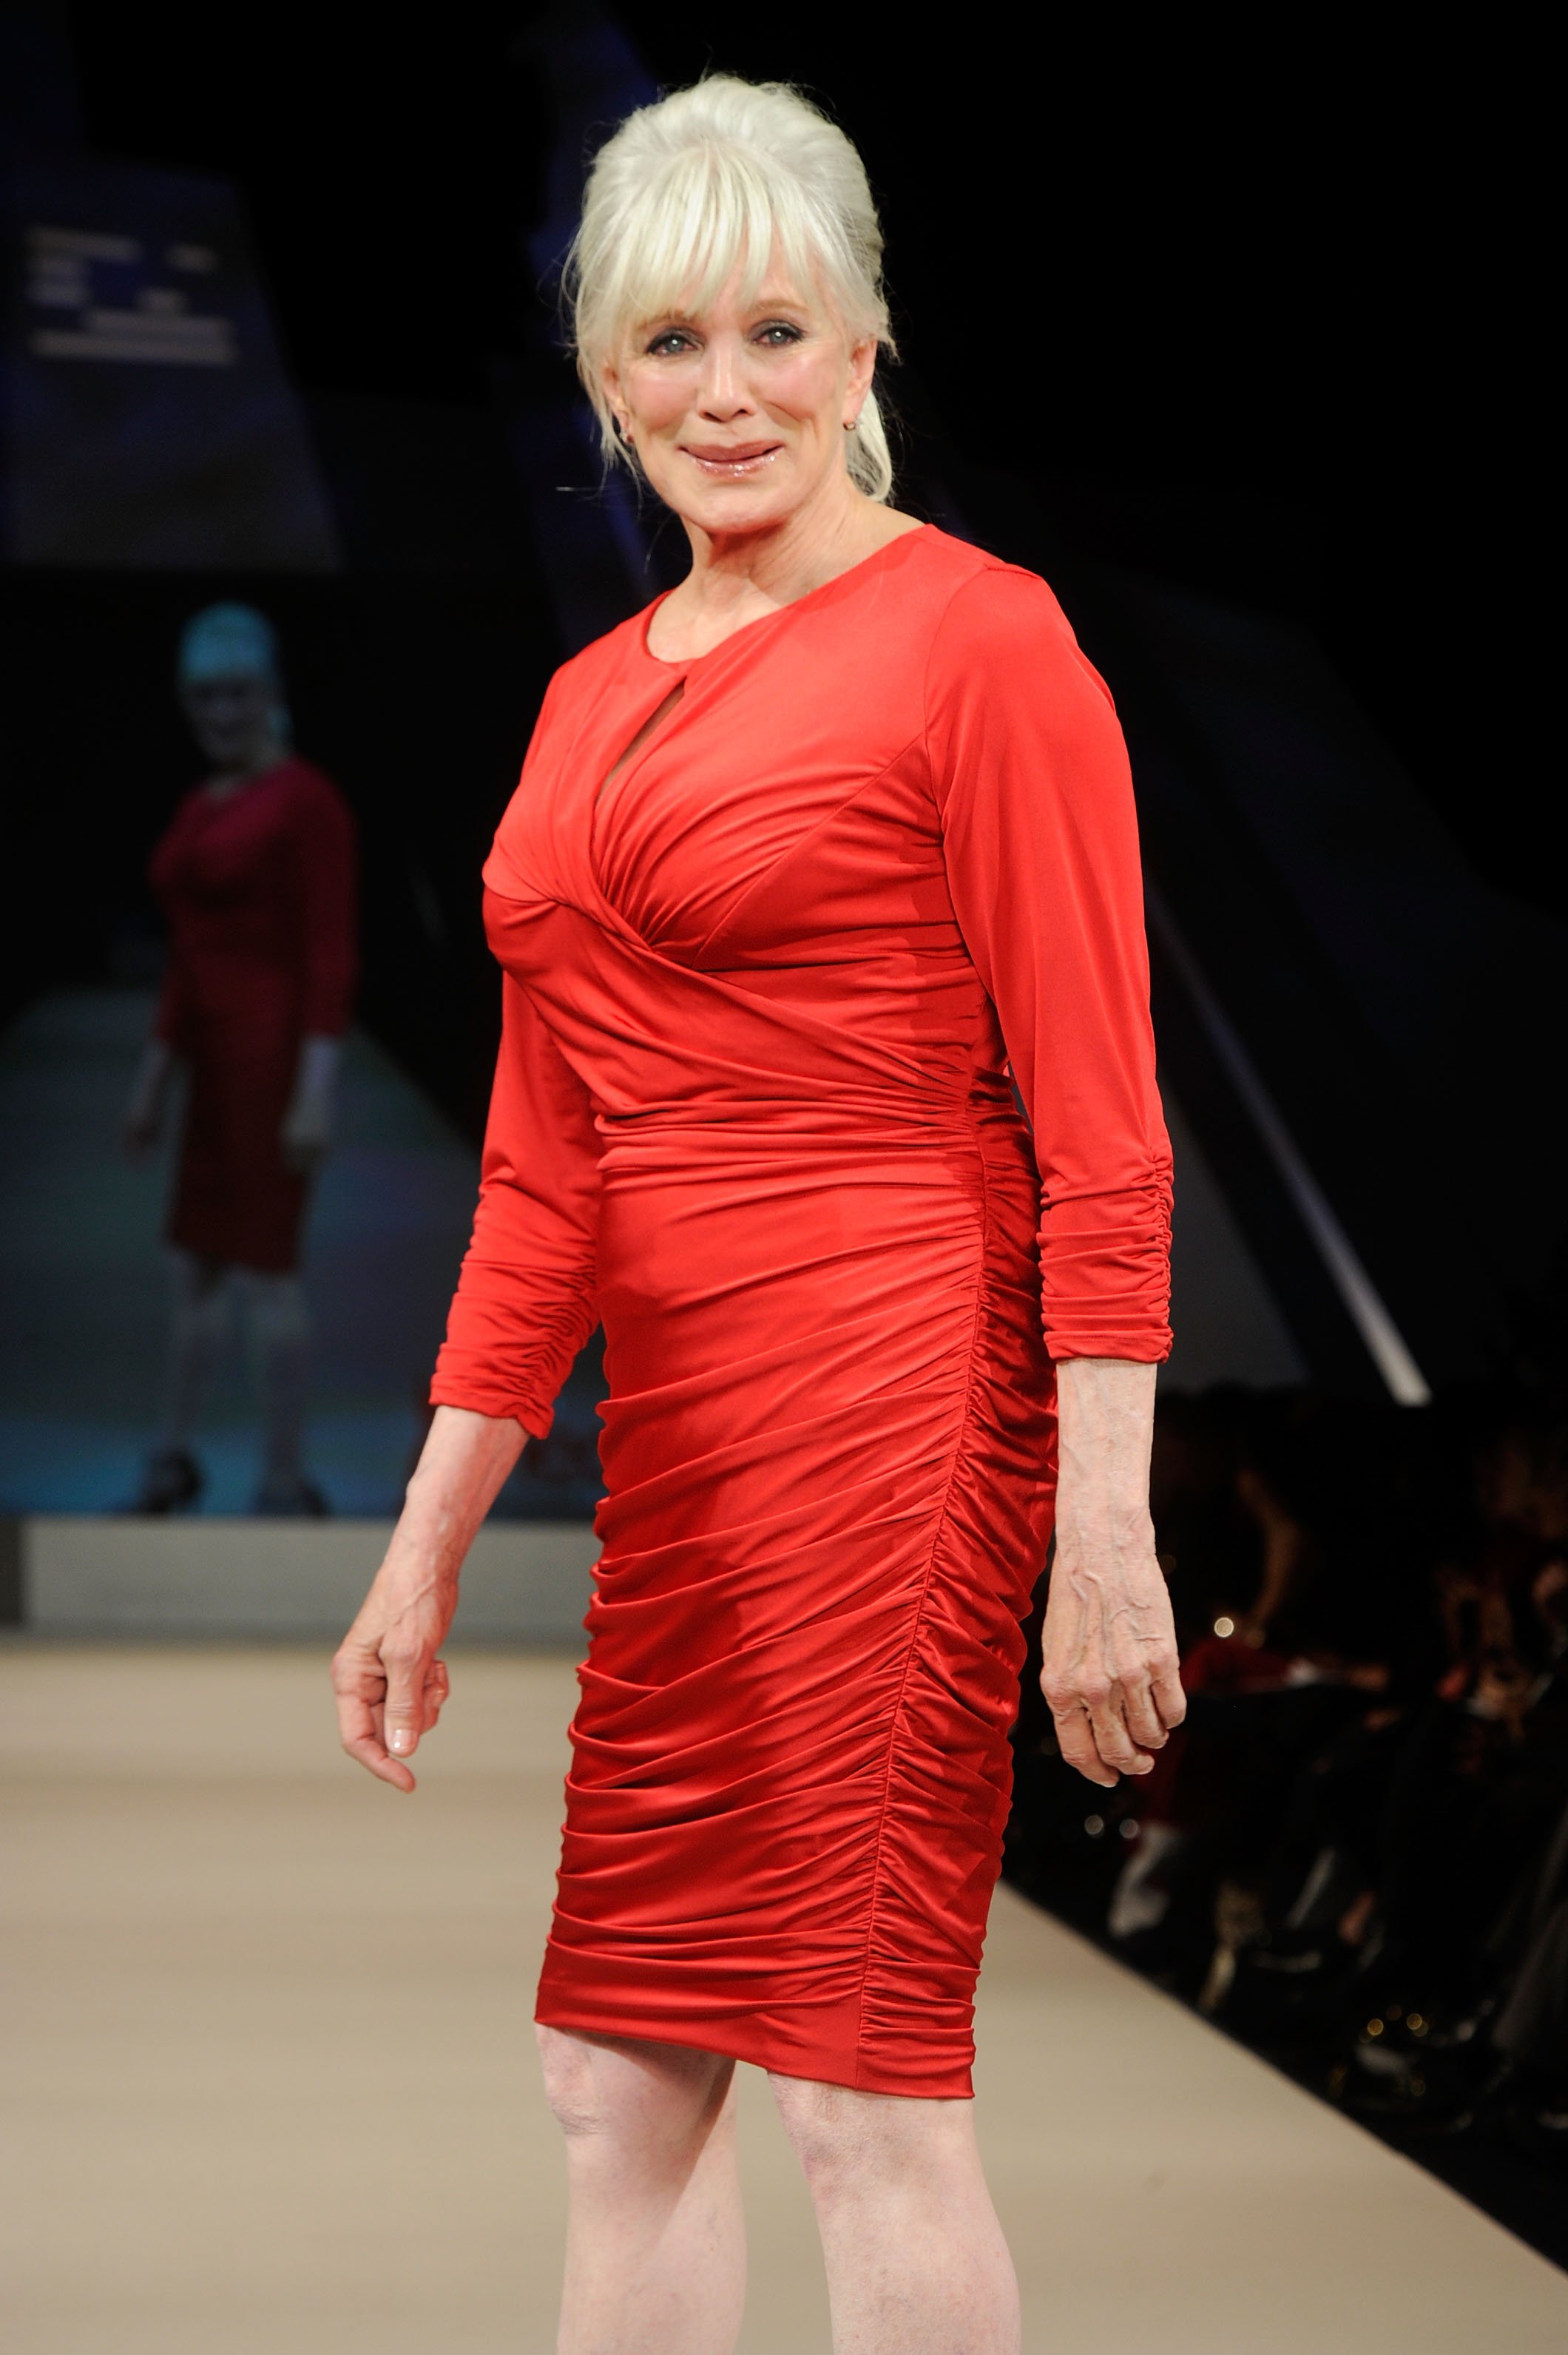 Linda Evans walks the runway at The Heart Truth's Red Dress Collection in New York City on February 8, 2012 | Photo: Getty IMages